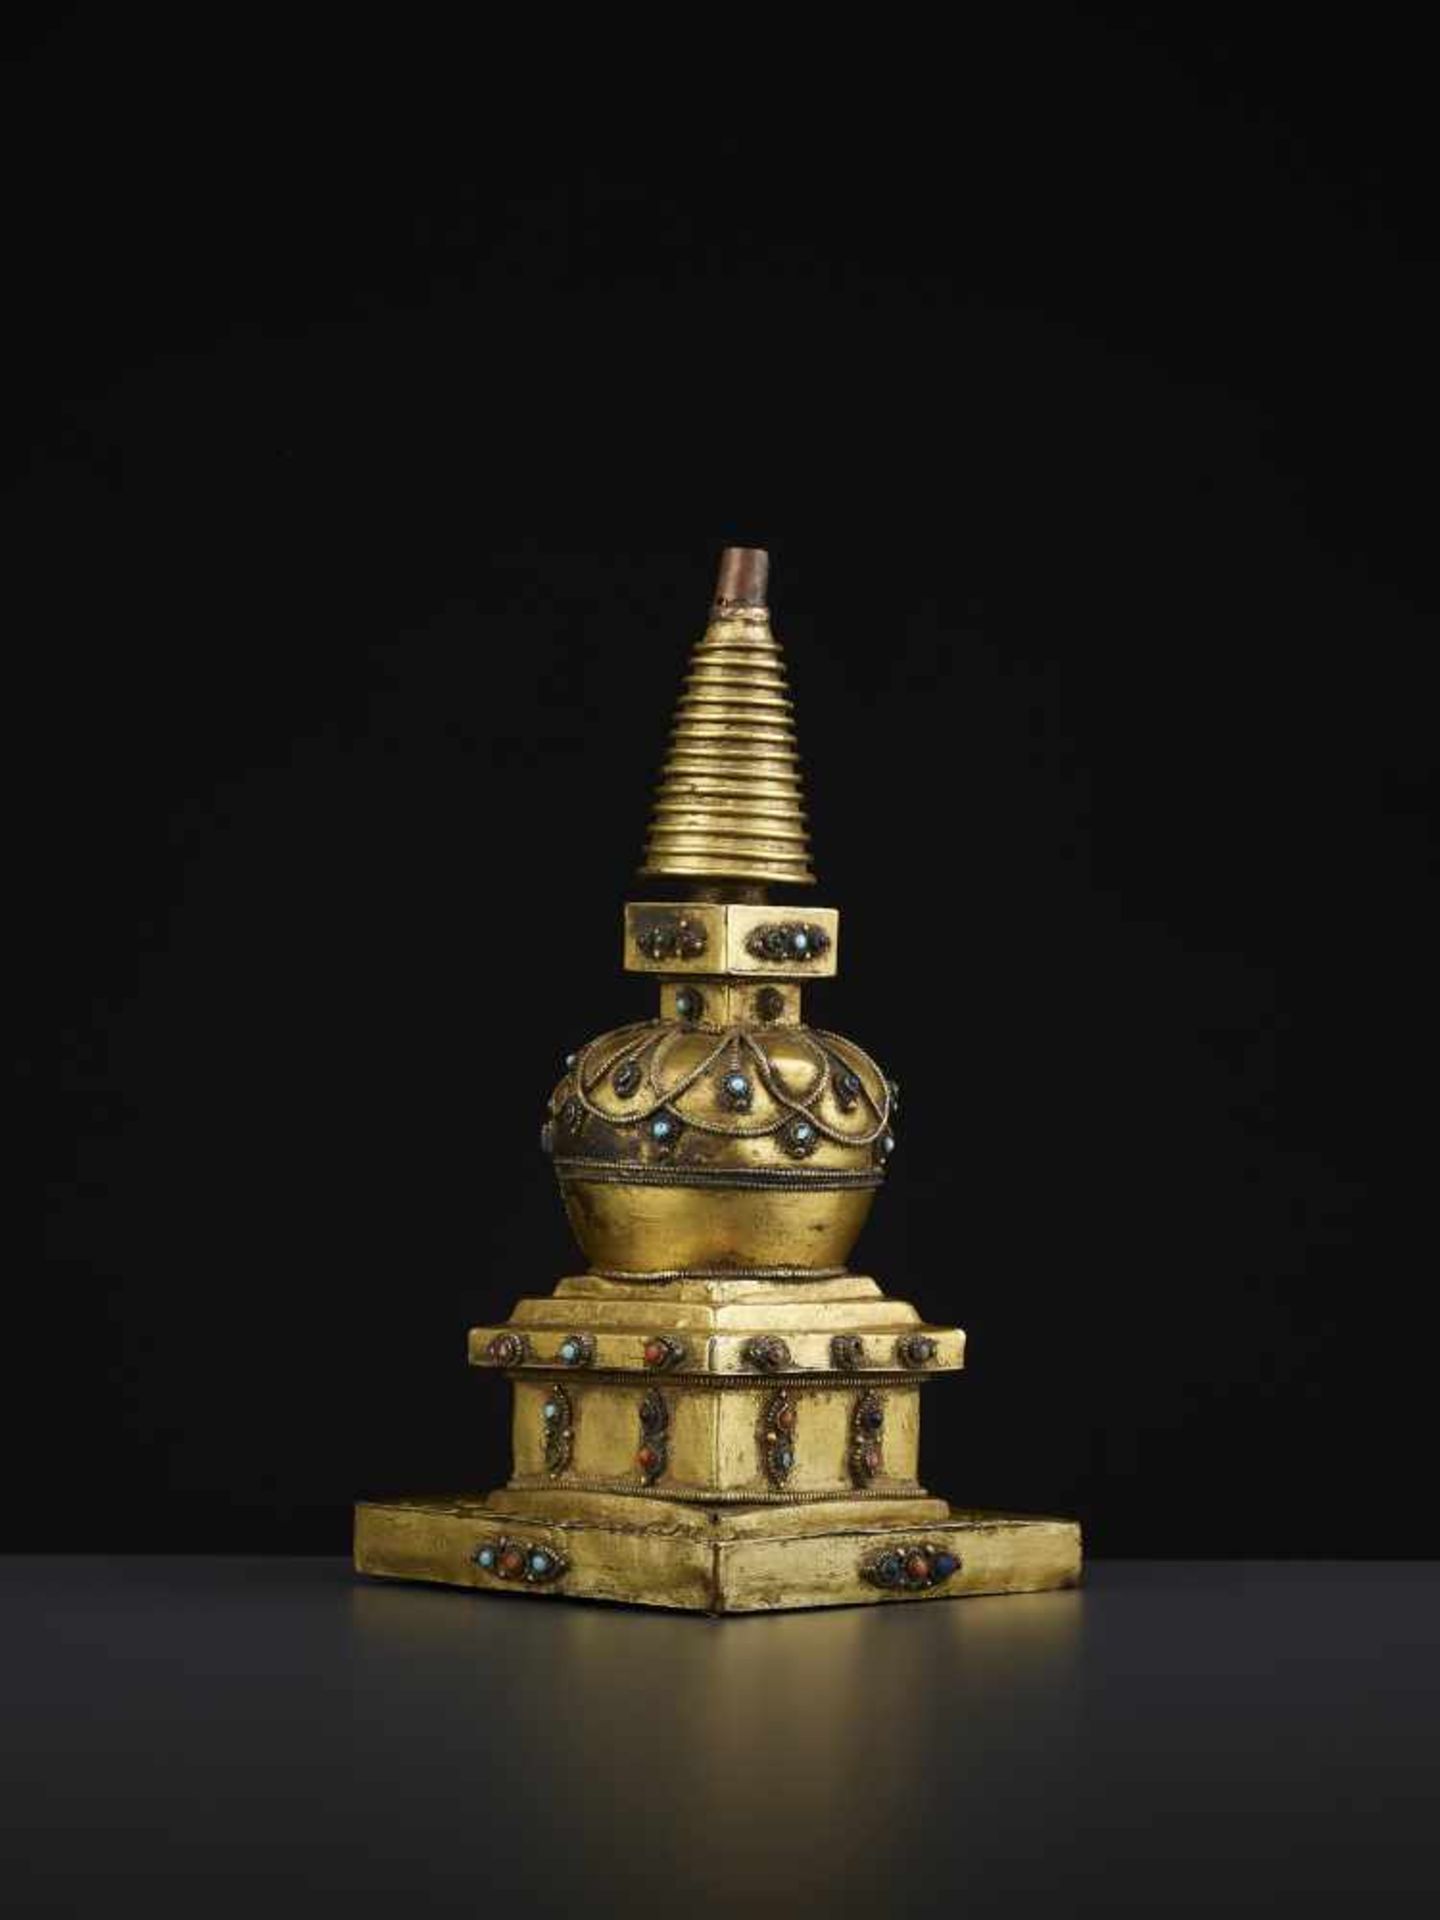 A REPOUSSE STUPA 18TH CENTURYTibet, 18TH to earlier 19TH century. A fire-gilt copper model of a - Image 5 of 11